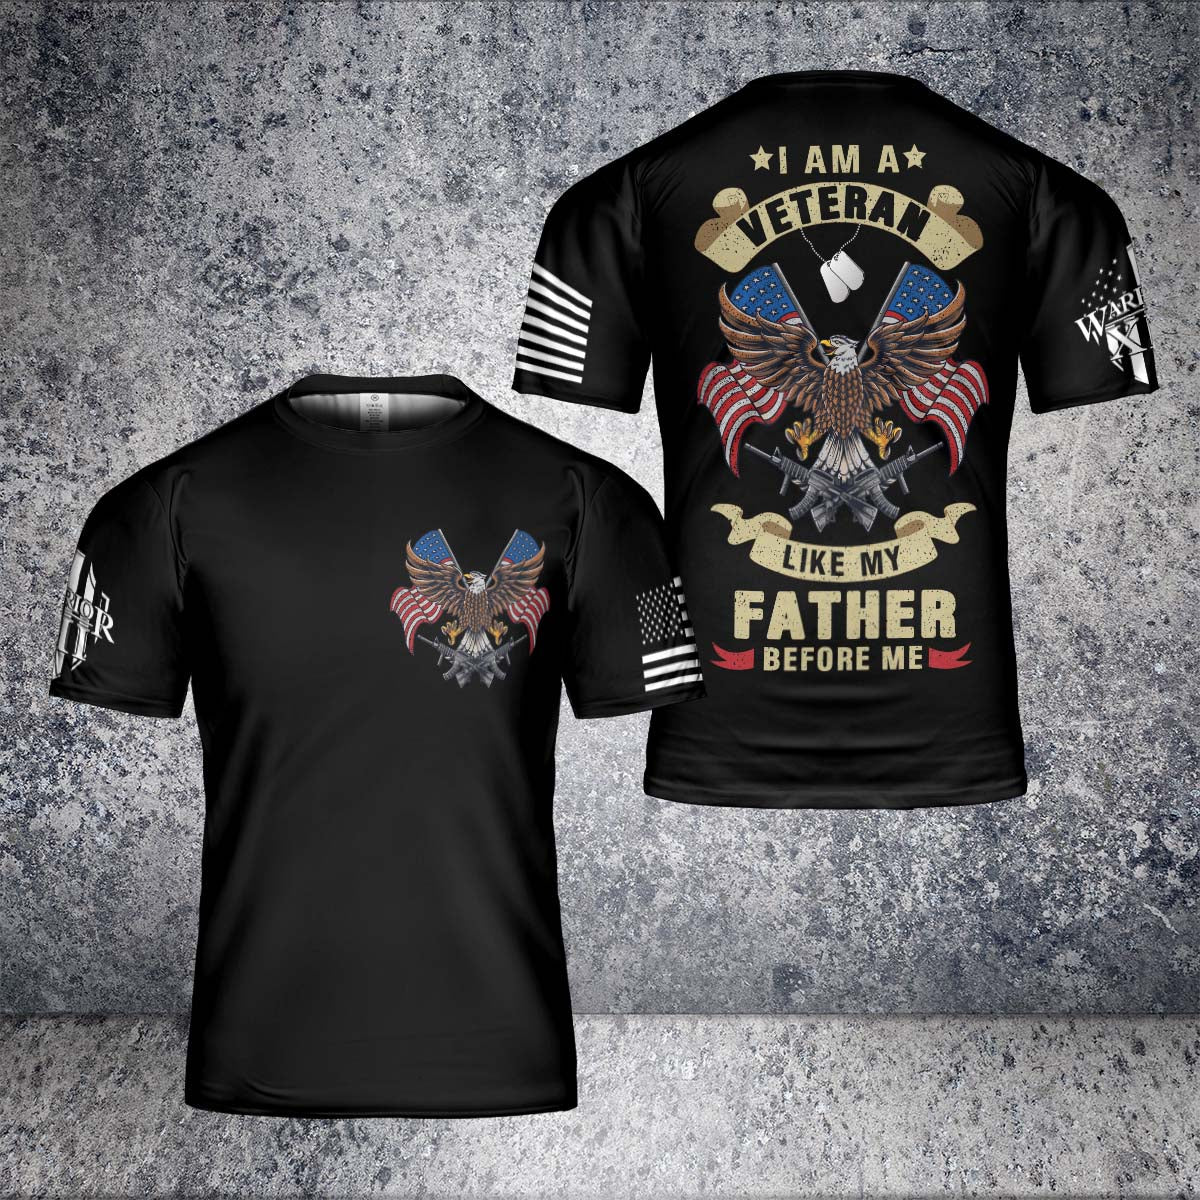 3D All Over Printed Veteran T Shirt/ I Am A Veteran Like My Father Before Me/ Gift For Dad Veteran/ 3D Veteran Shirts